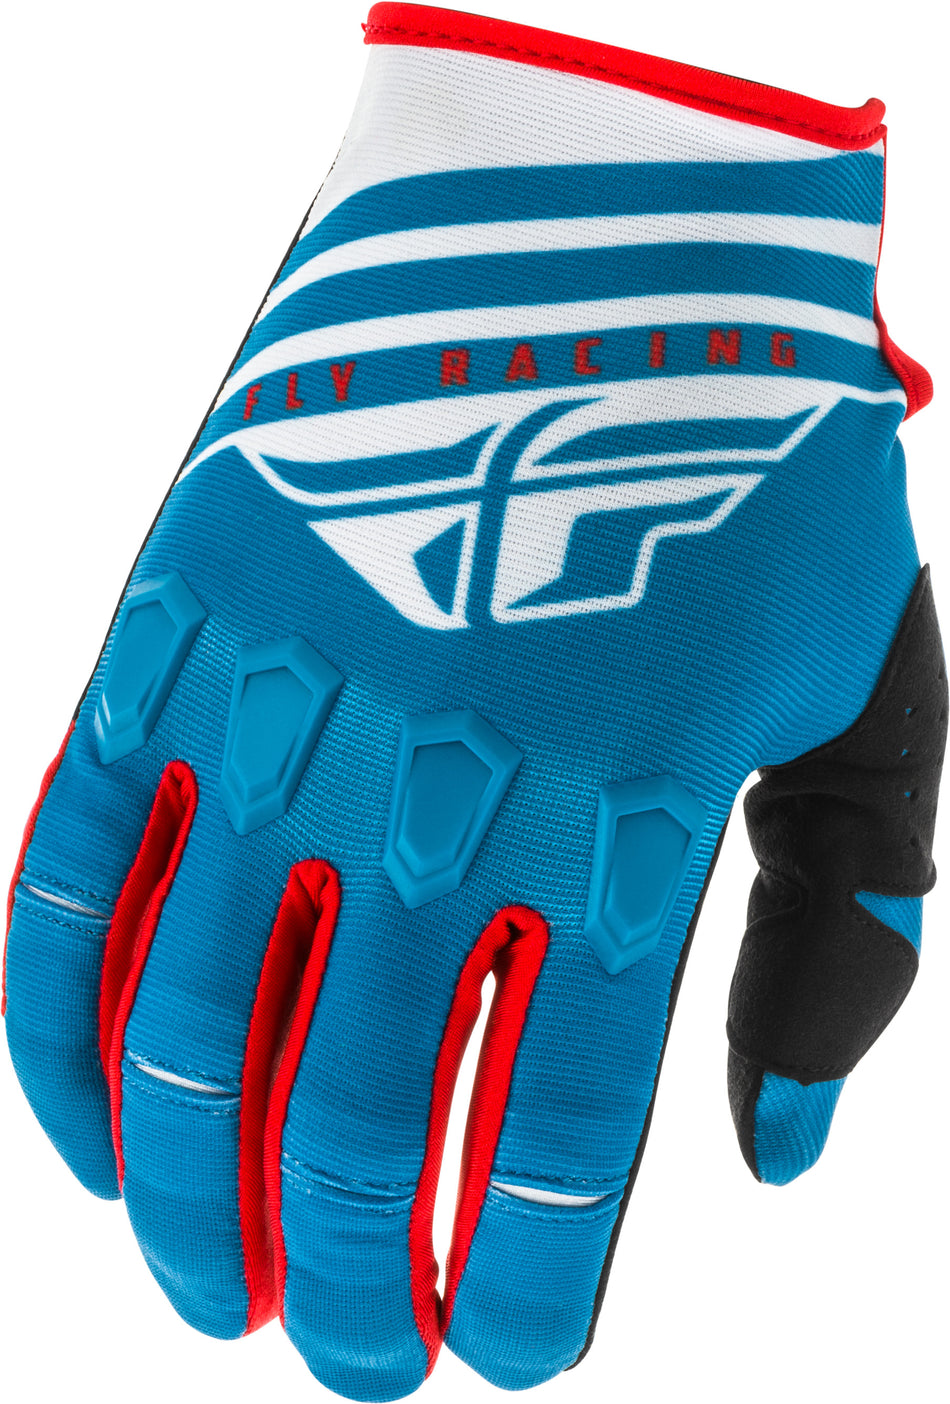 FLY RACING Kinetic K220 Gloves Blue/White/Red Sz 13 373-51113